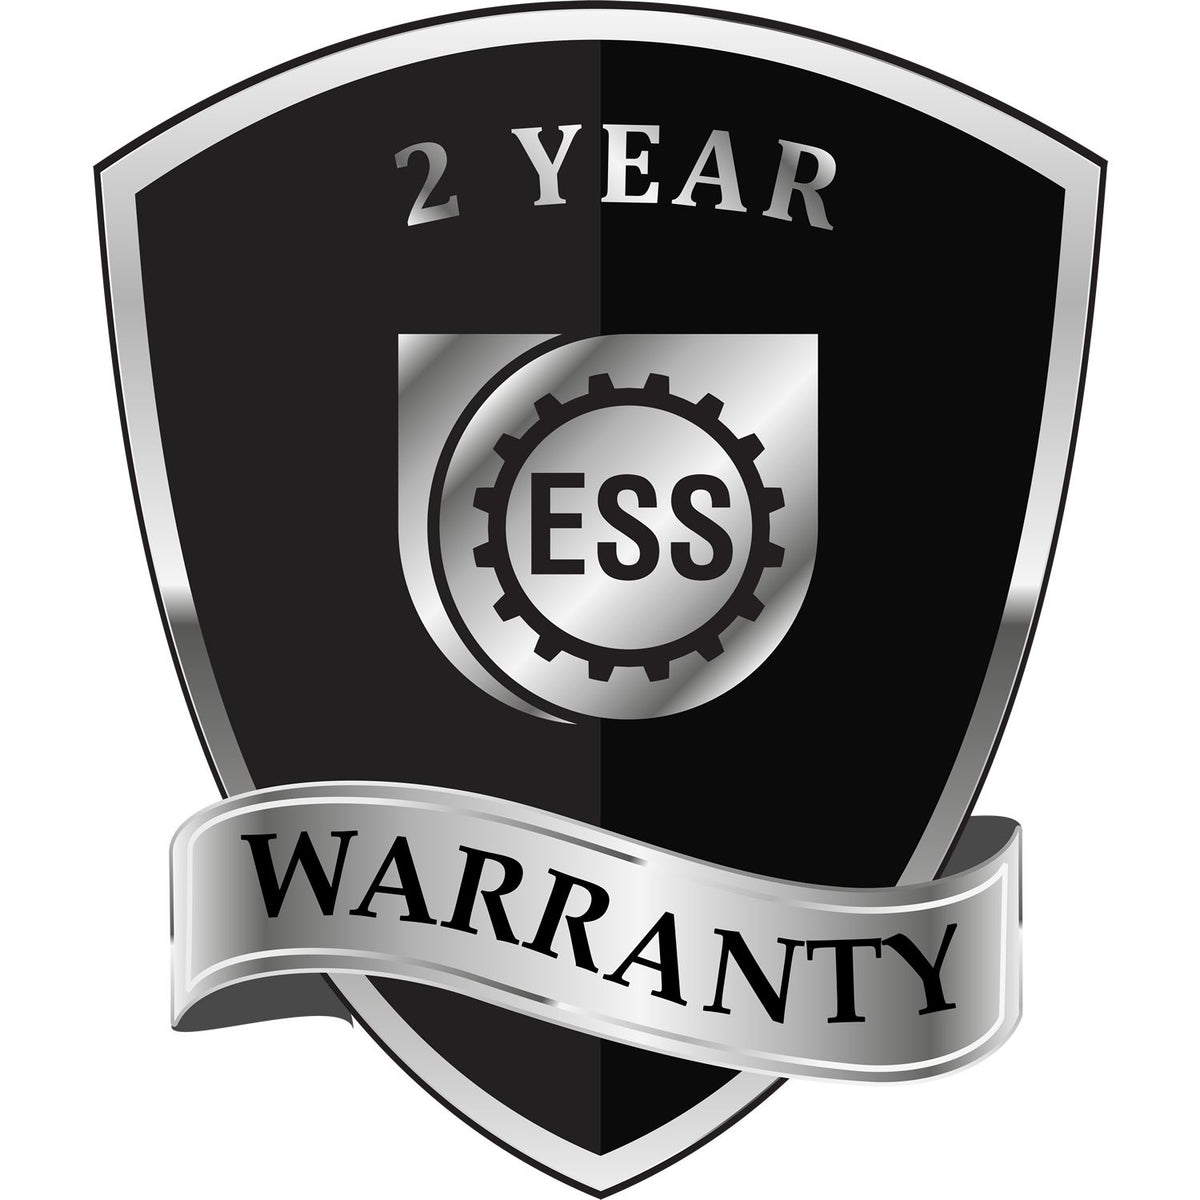 A black and silver badge or emblem showing warranty information for the Hybrid Delaware Engineer Seal